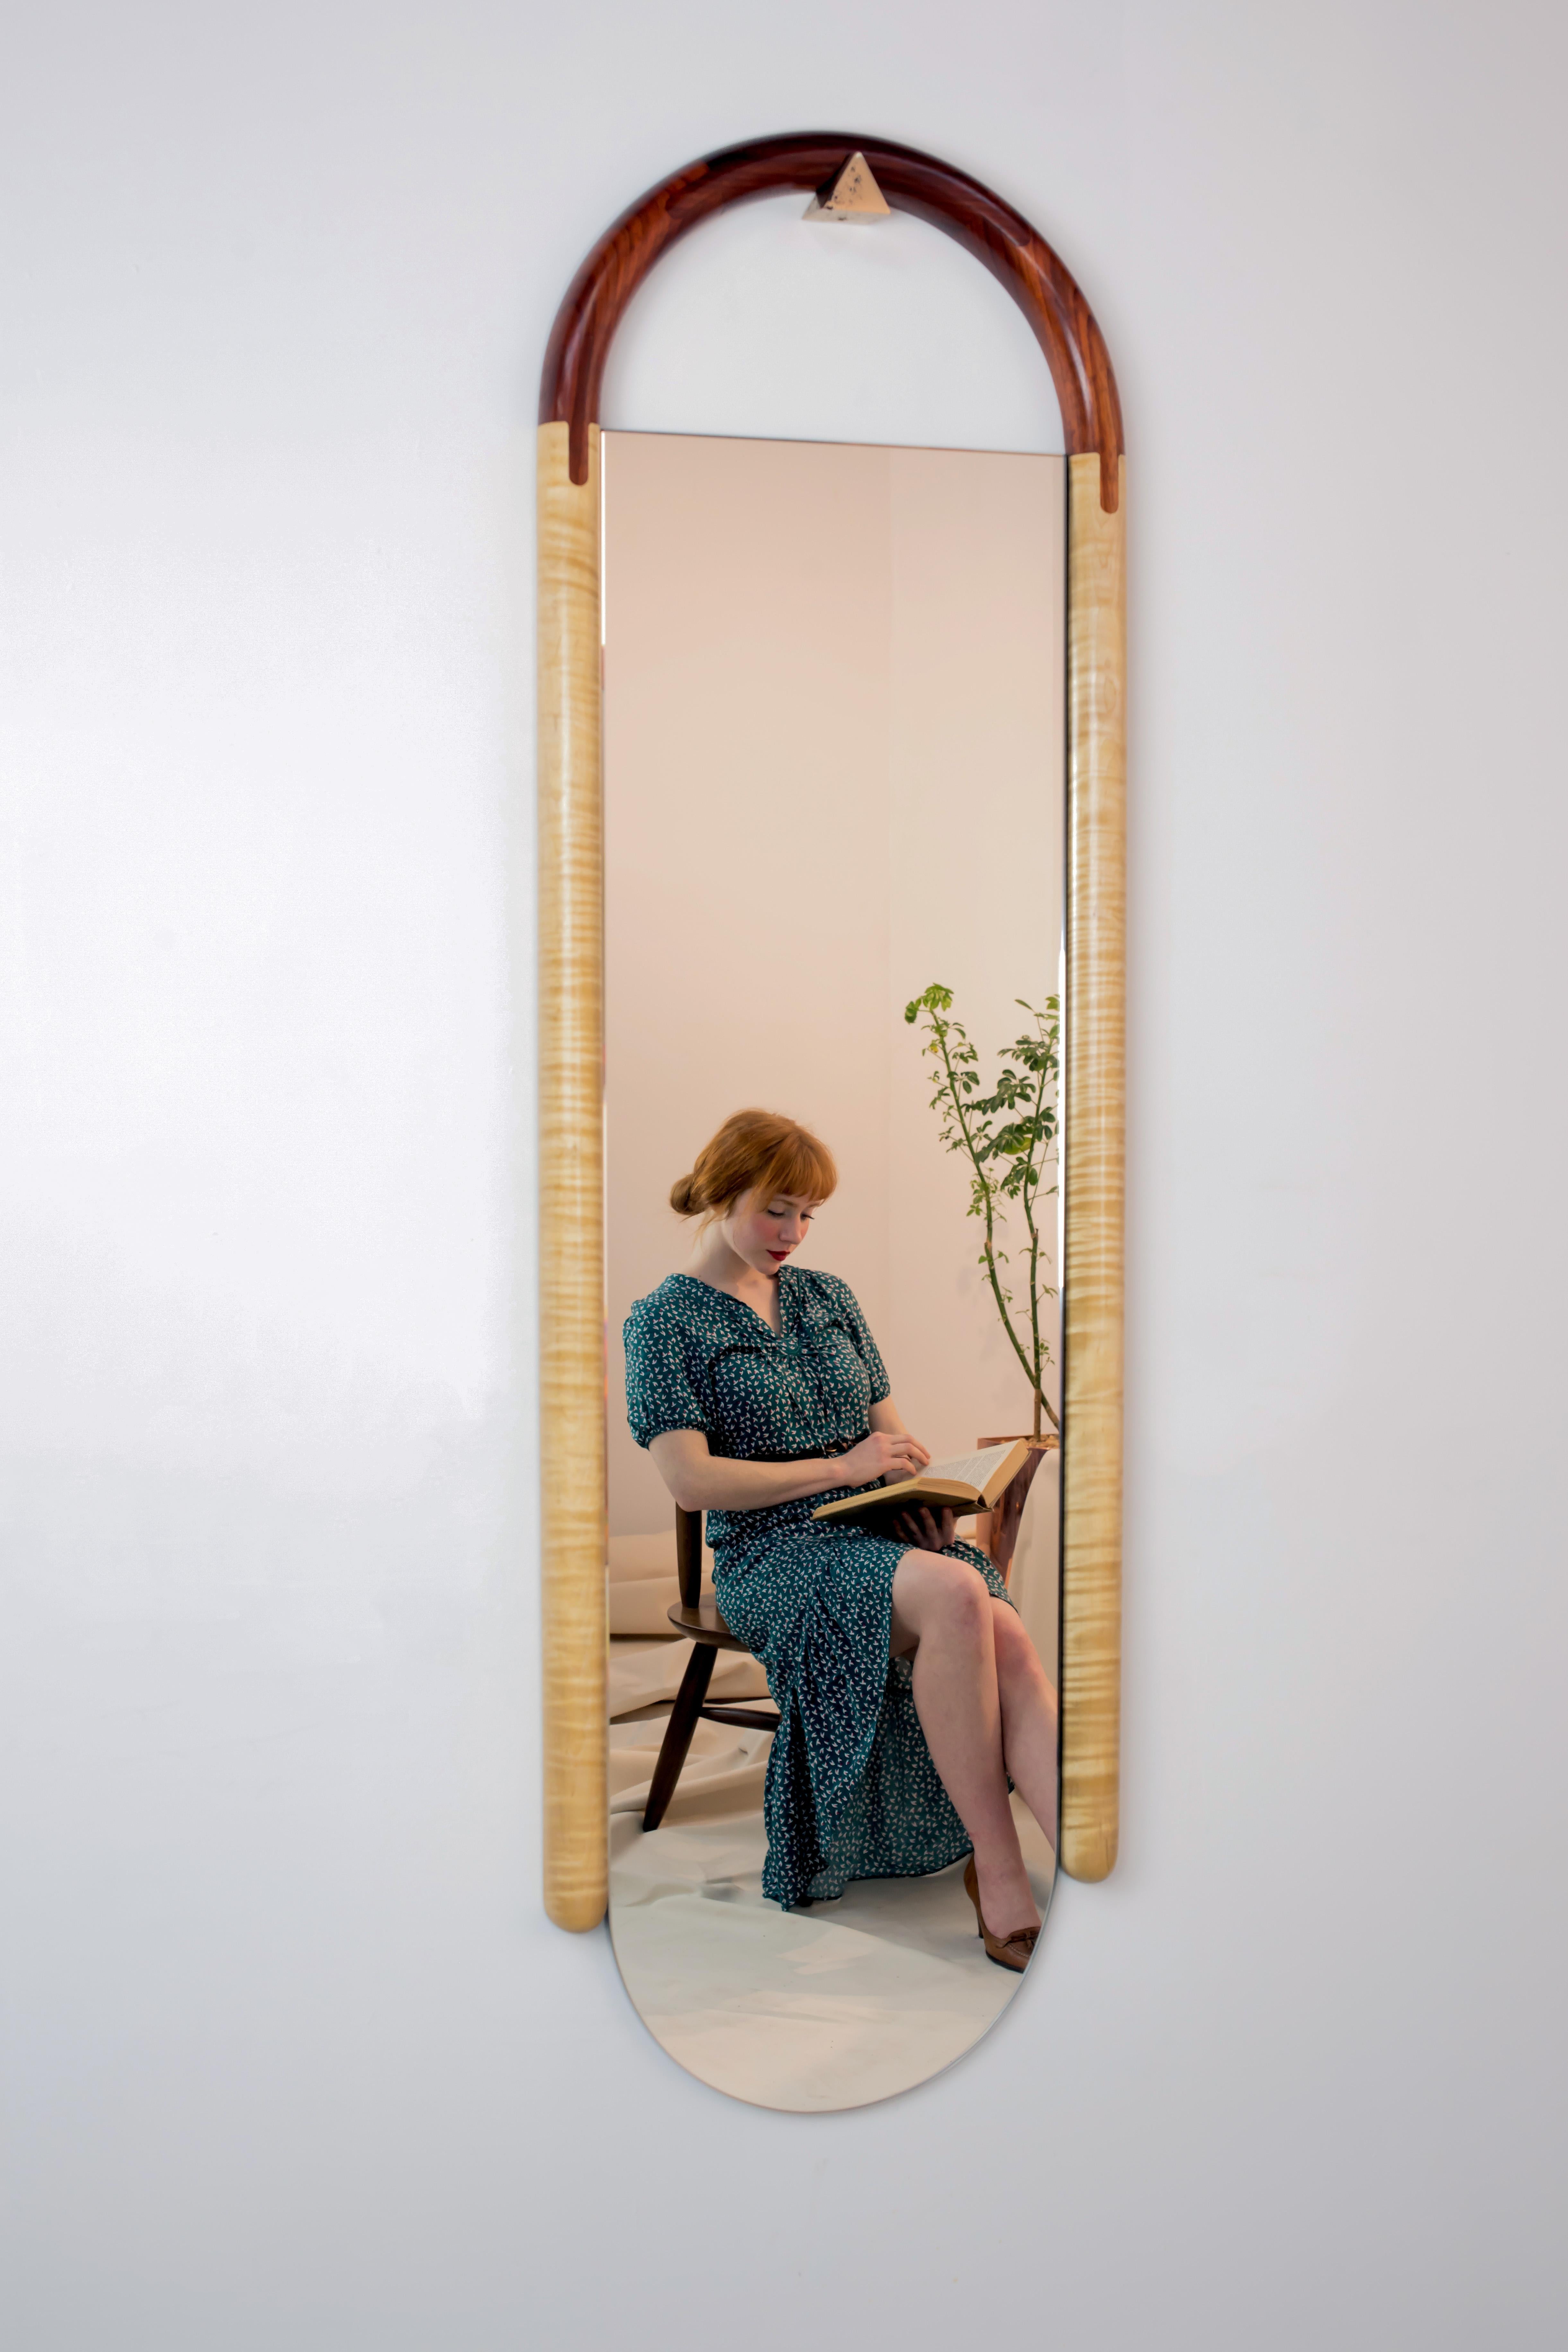 Halo Mirror Wall Mounted Birnam Wood Studio in Cherry and Curly Maple For Sale 1